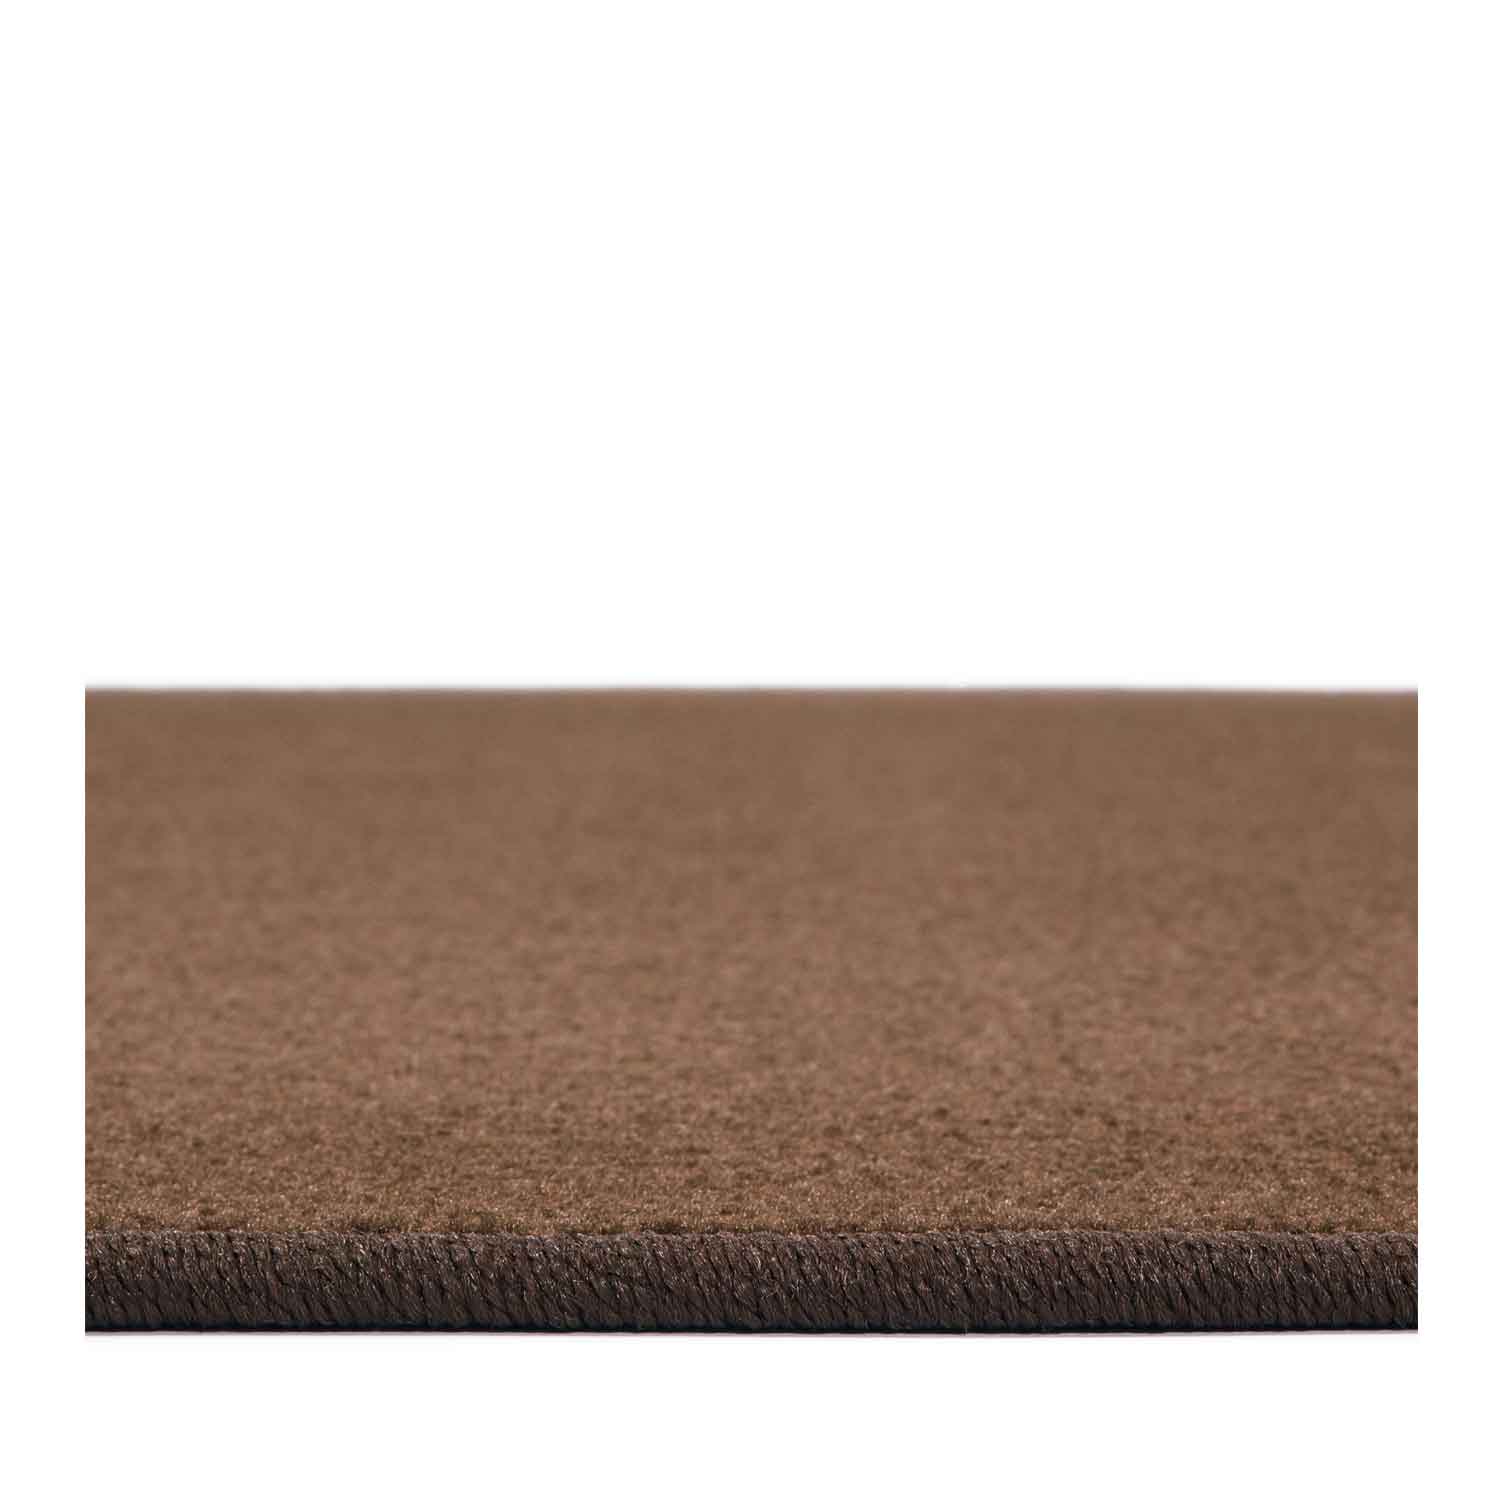 Mt. Shasta Solid Rug, Cocoa, Rectangle 4' x 6'